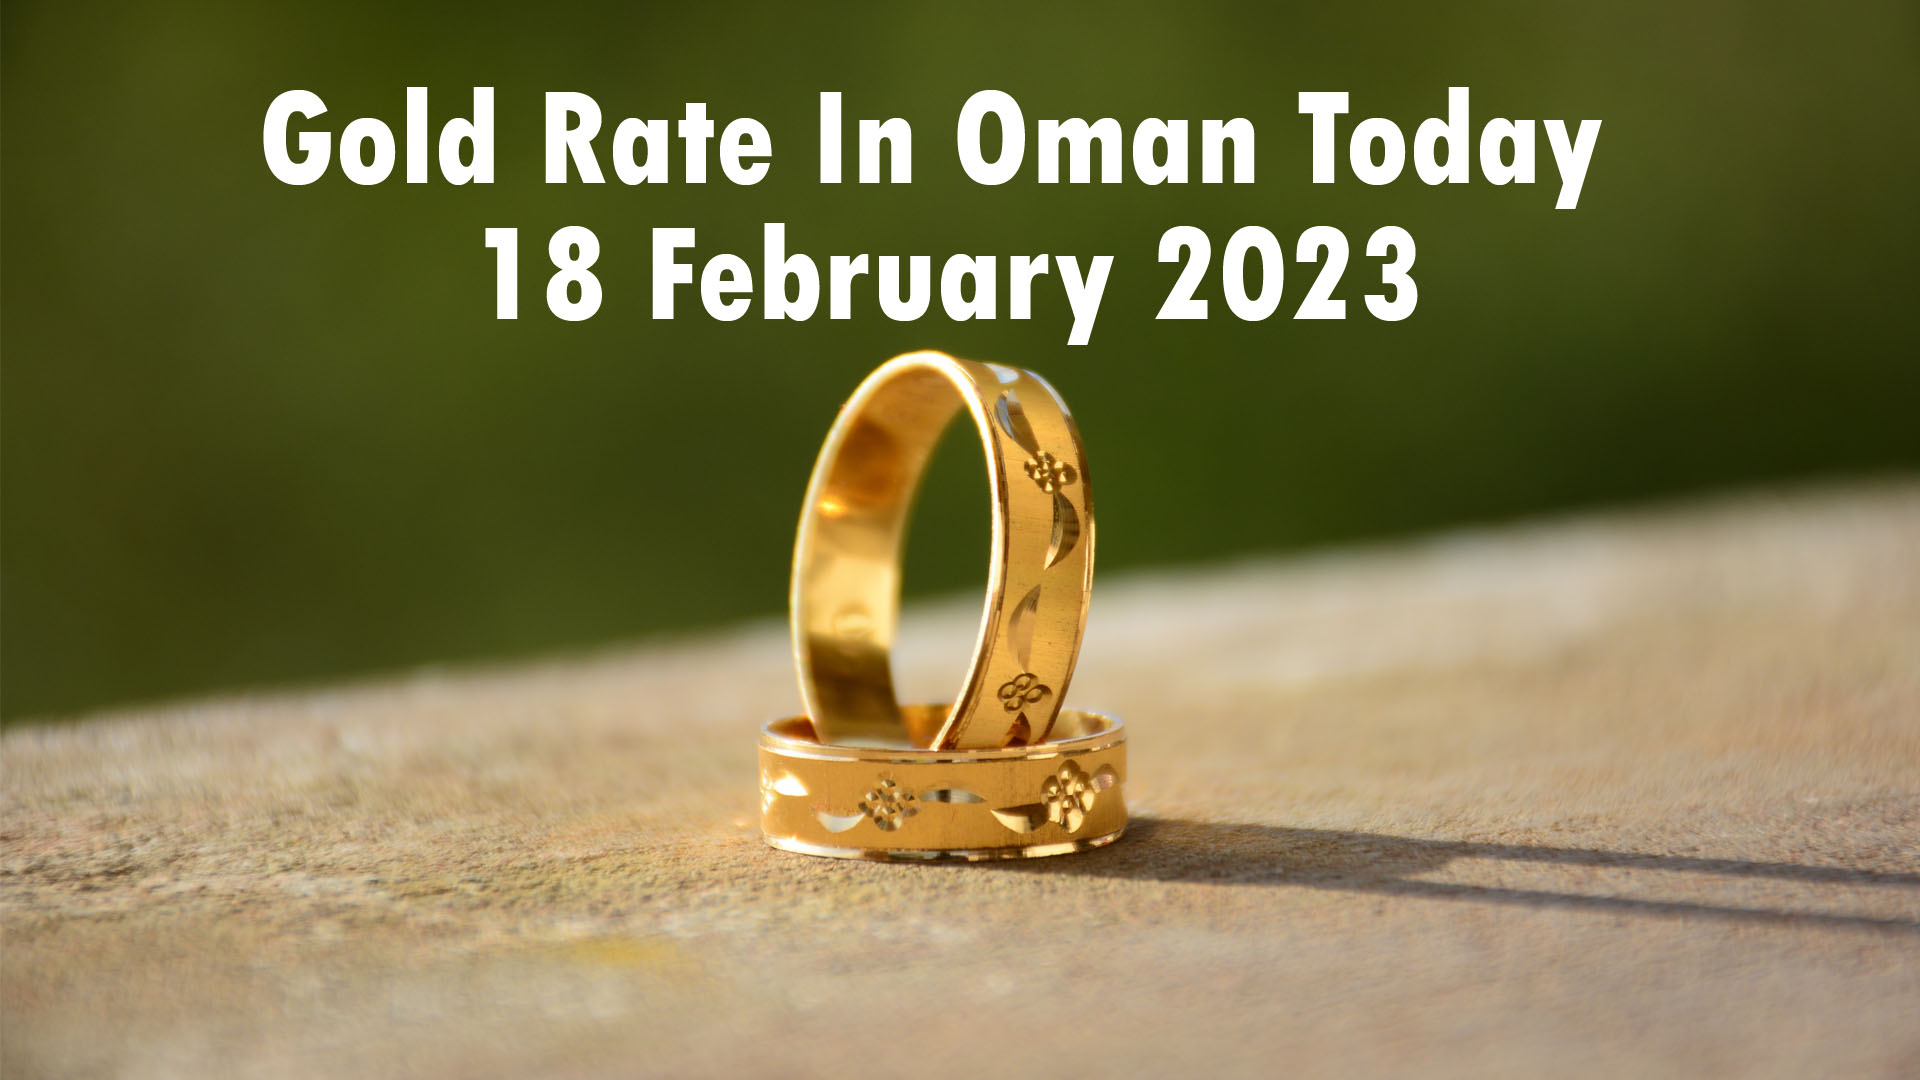 Gold Rate In Oman Today 18 February 2023